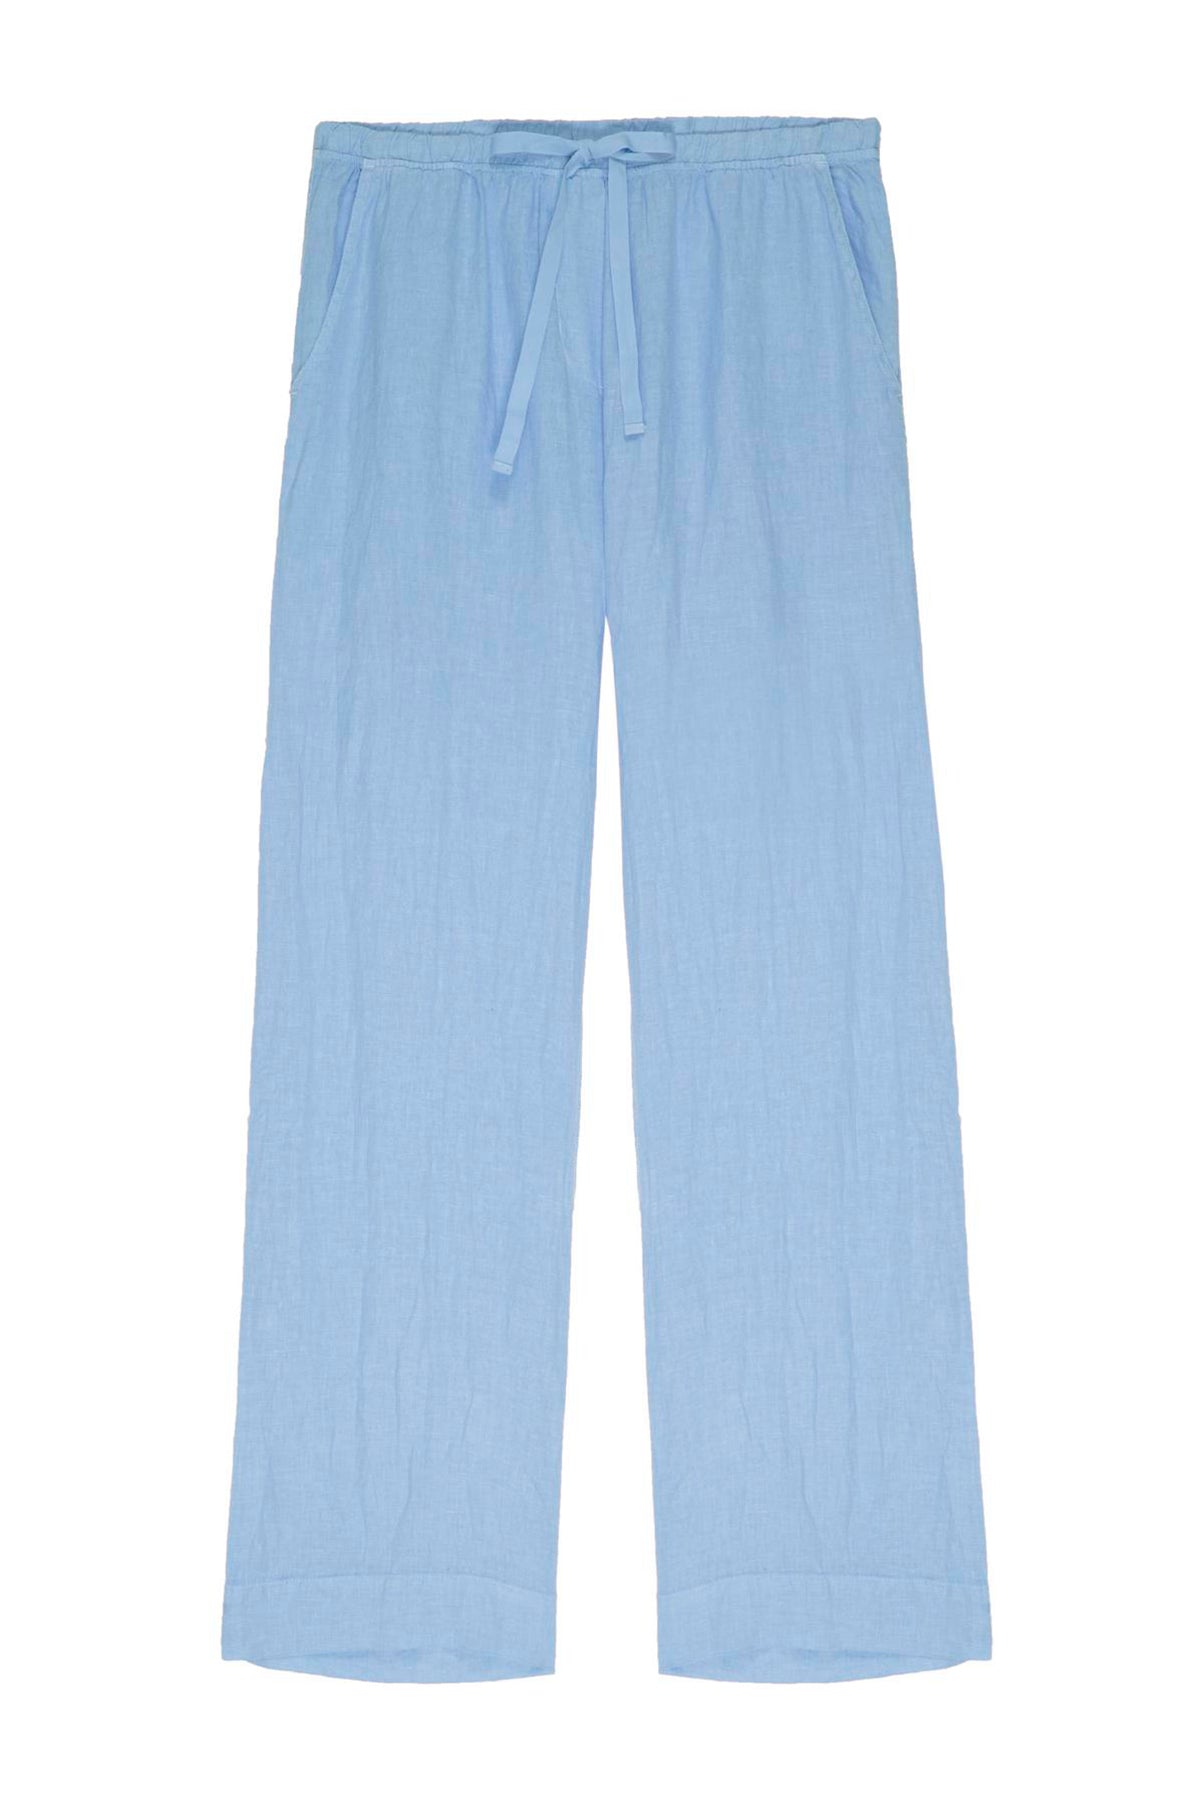 Light blue relaxed fit PICO LINEN PANTS with a drawstring waist, displayed against a white background by Velvet by Jenny Graham.-36580165517505